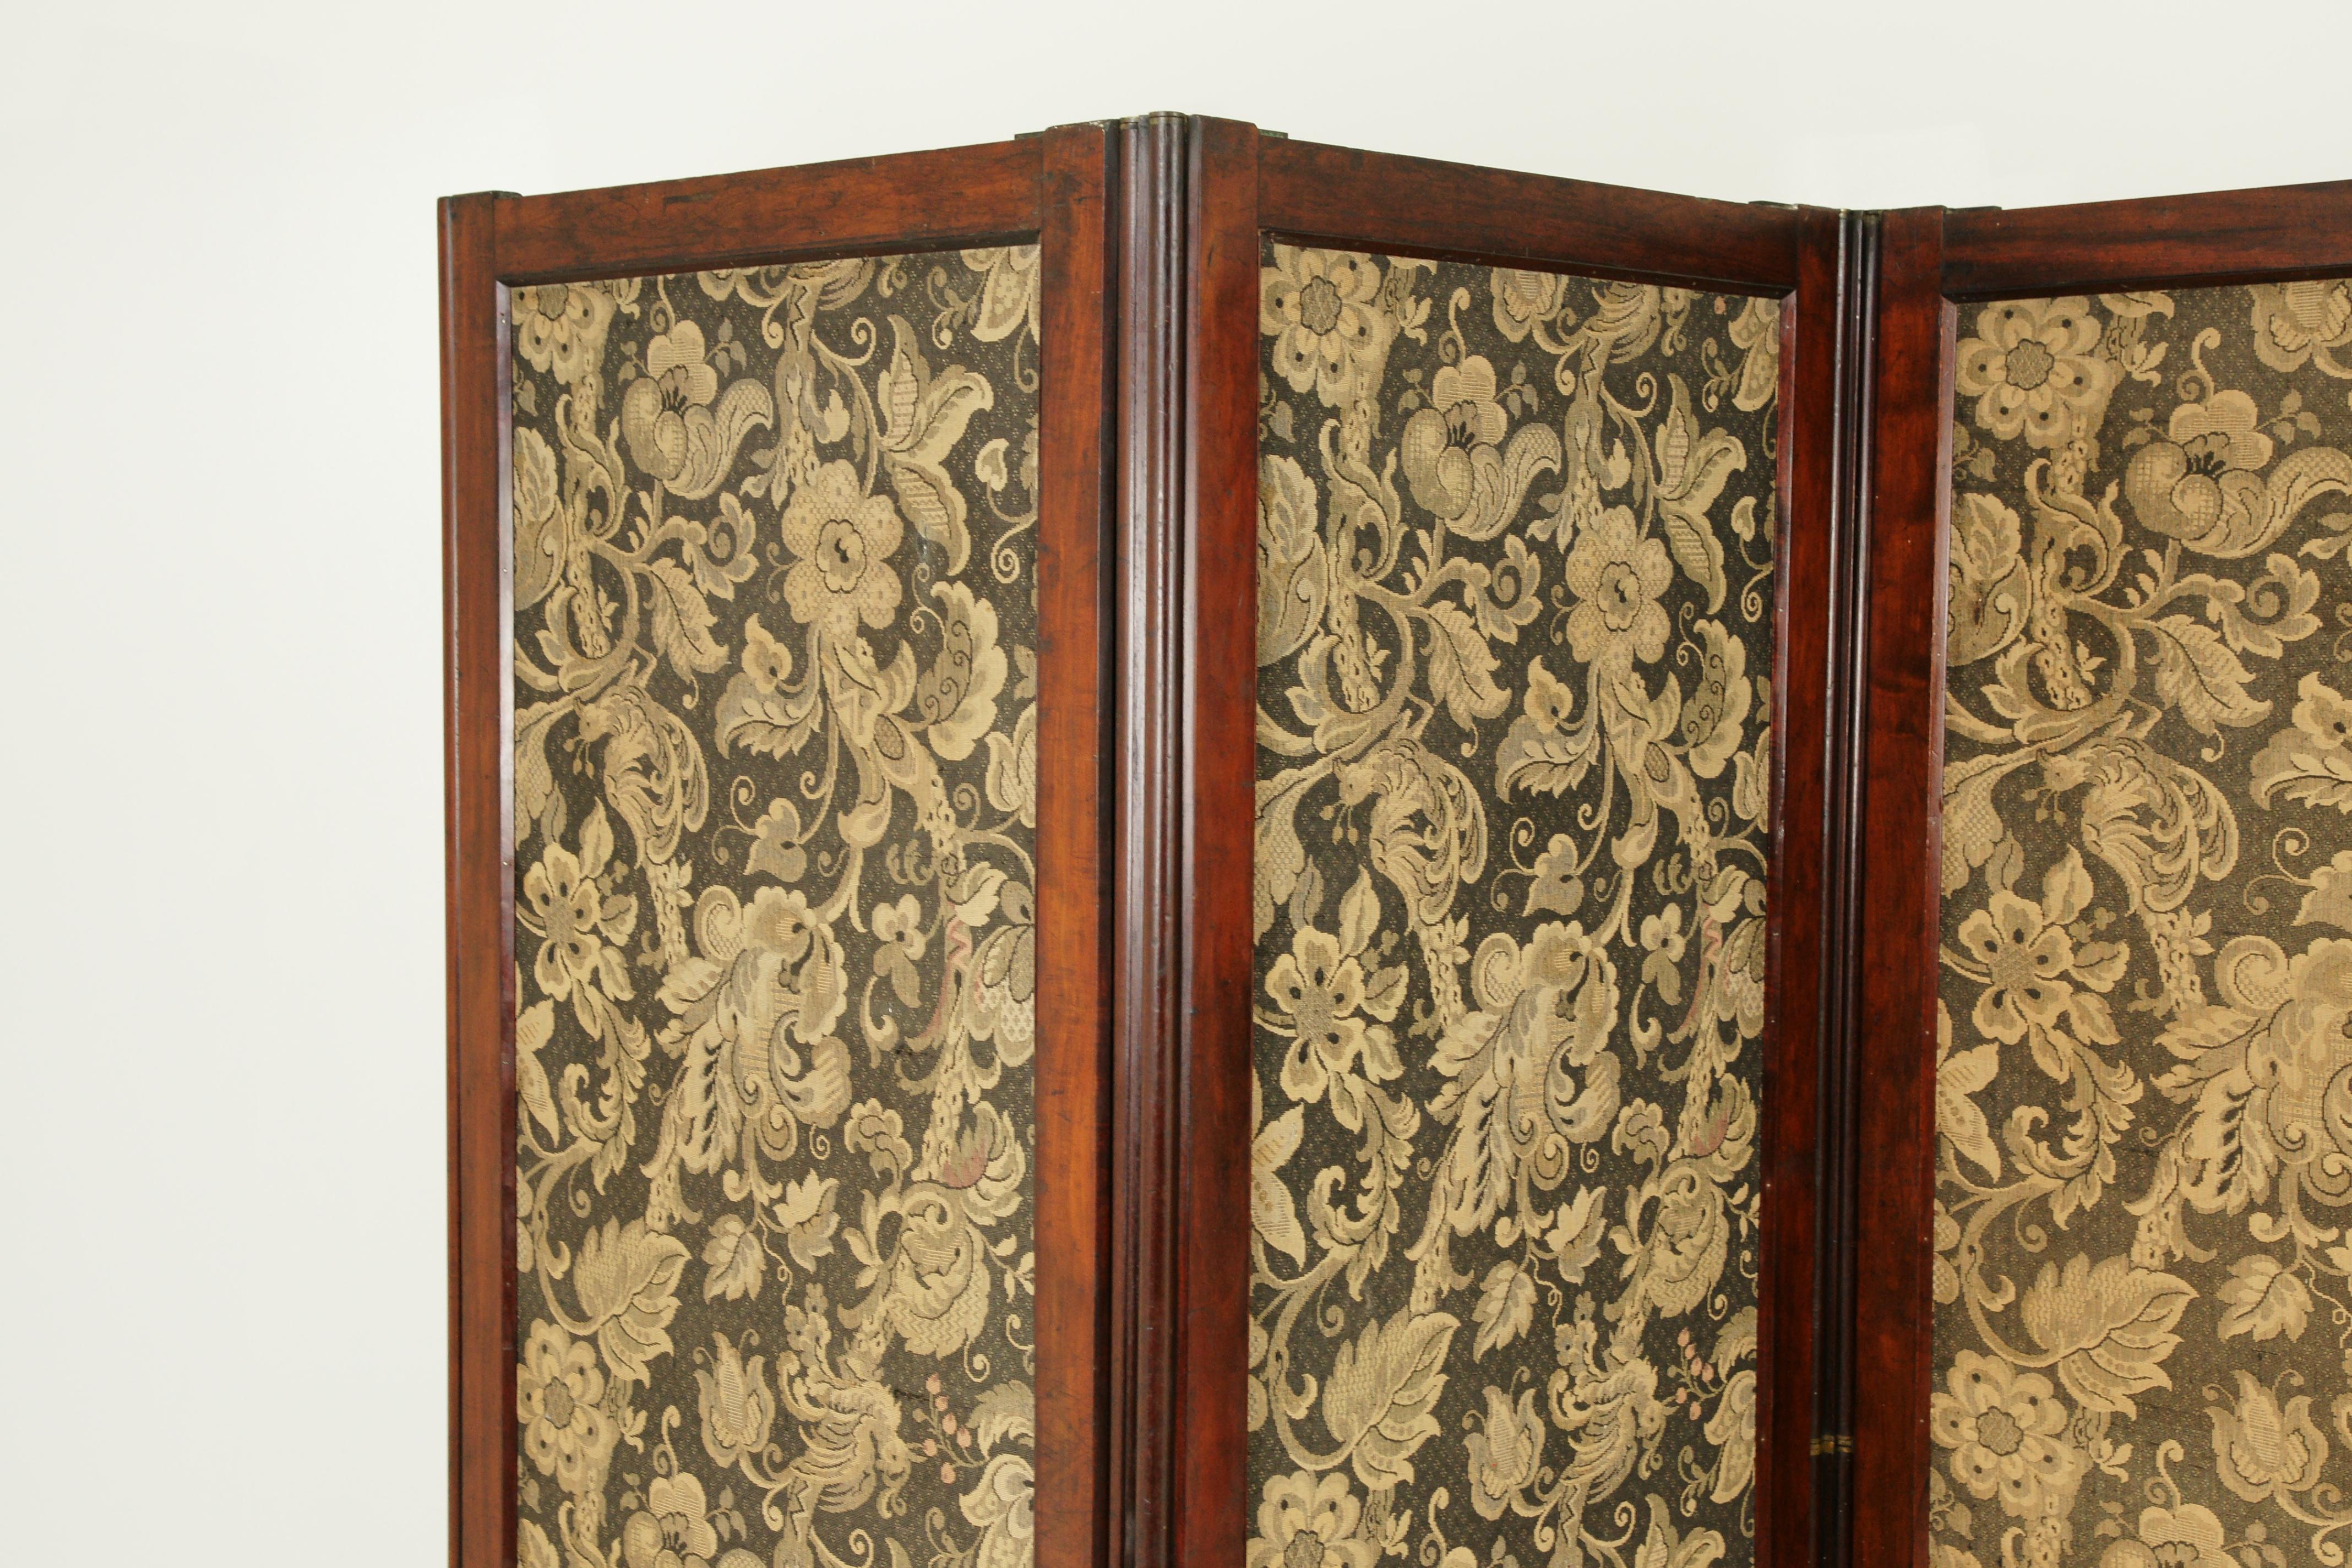 Antique room divider, privacy screen, vintage partition, folding screen, Scotland 1880, antique furniture, B1412

Scotland, 1880
Solid walnut
All original finish
Each section to the front has tapestry panels in a botanical theme (fairly good